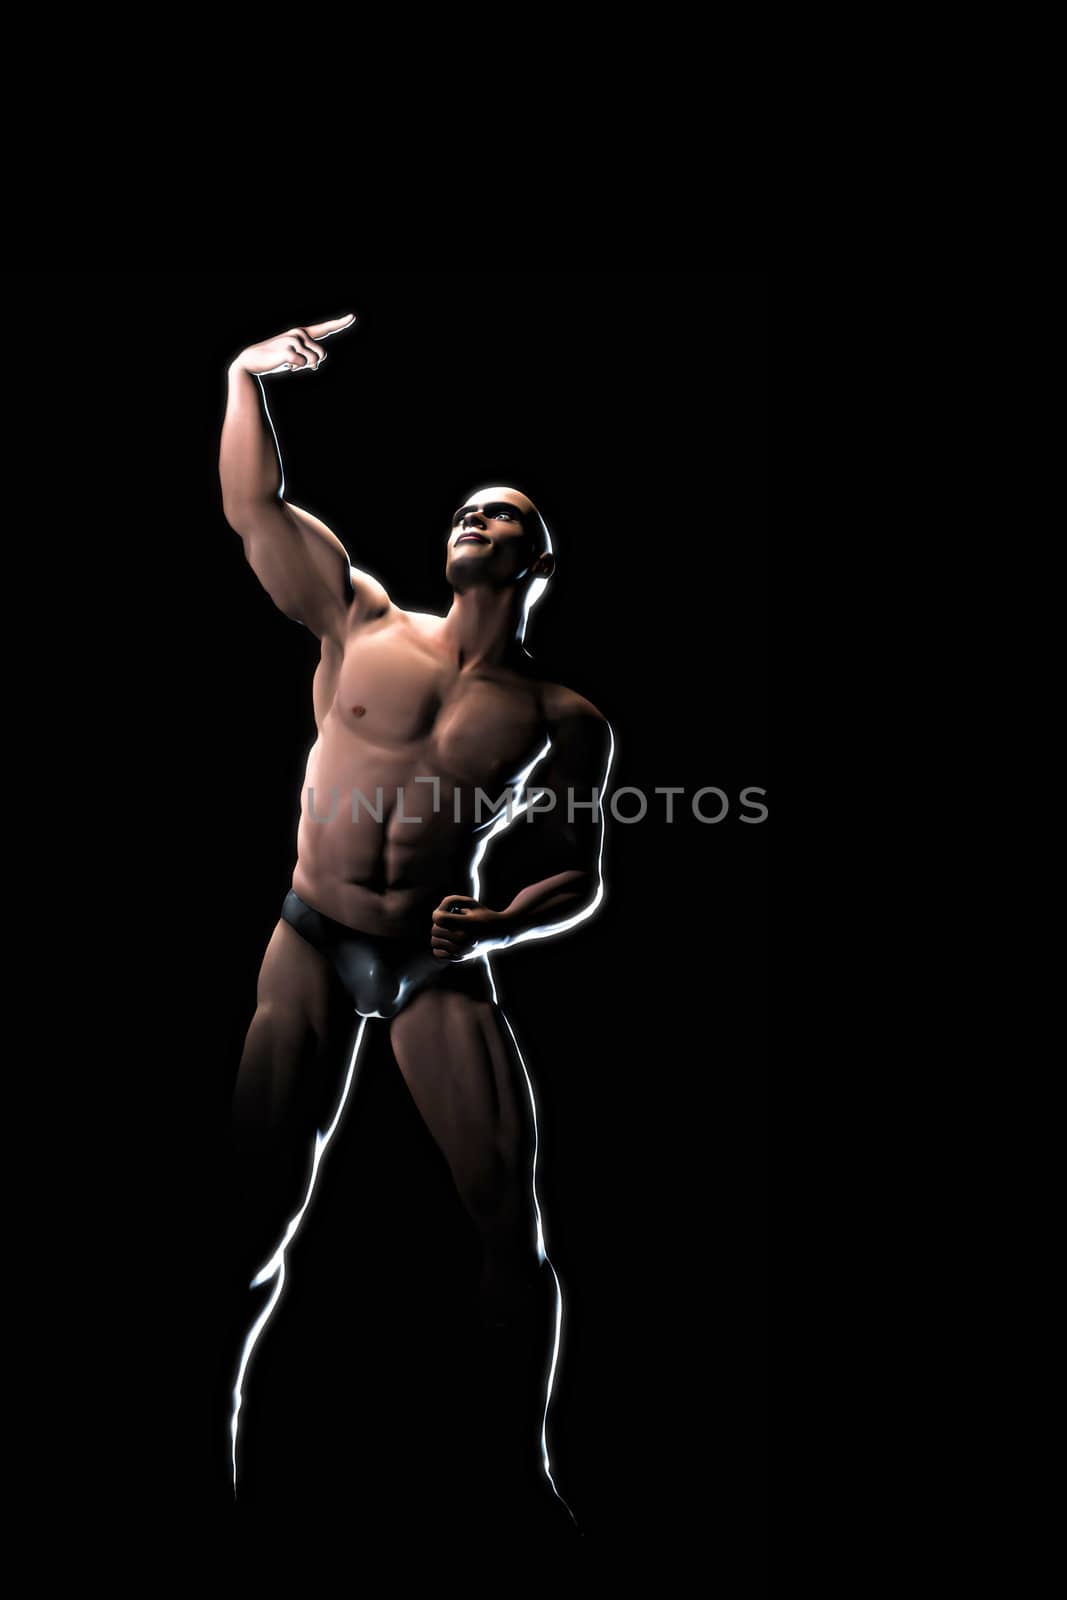 An image of a muscular athlete man pointing